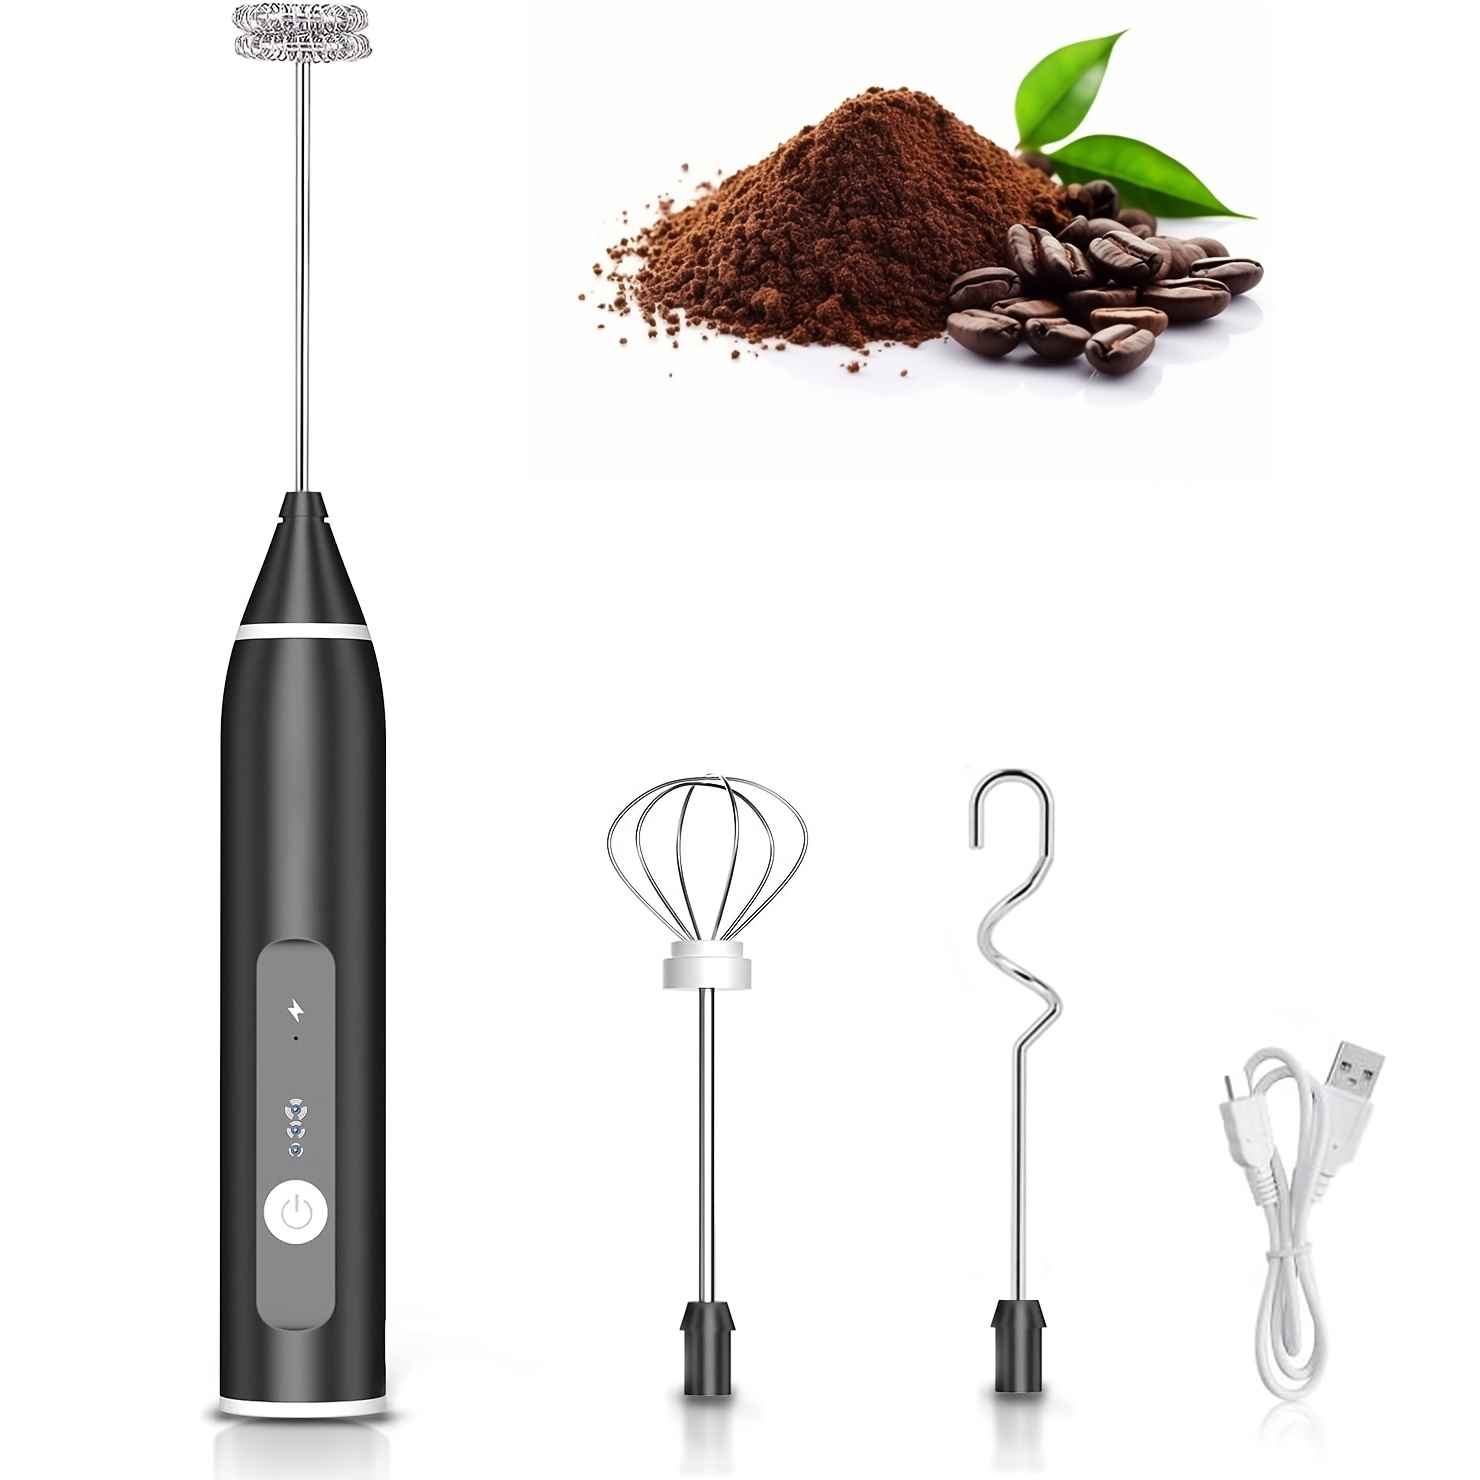 Milk Frother Usb Rechargeable Handheld Electric Whisk Coffee Mixer